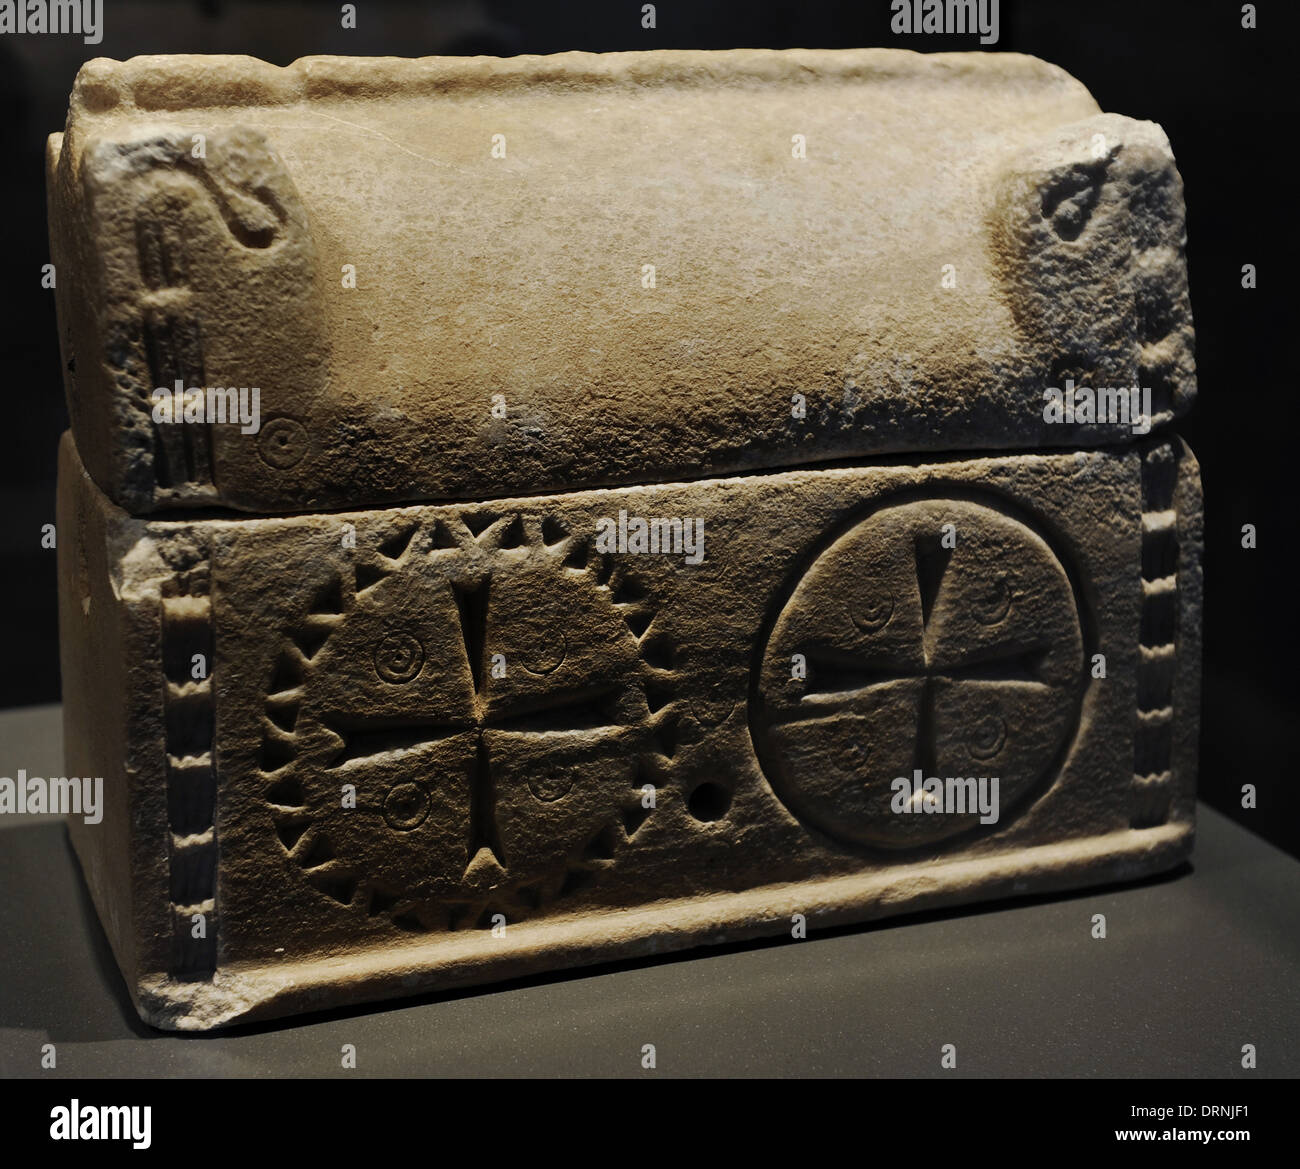 Byzantine Empire. Sarcophagus-shaped reliquary. 5th-6th centuries AD. Gypsum. From Apamea, Syria. Stock Photo